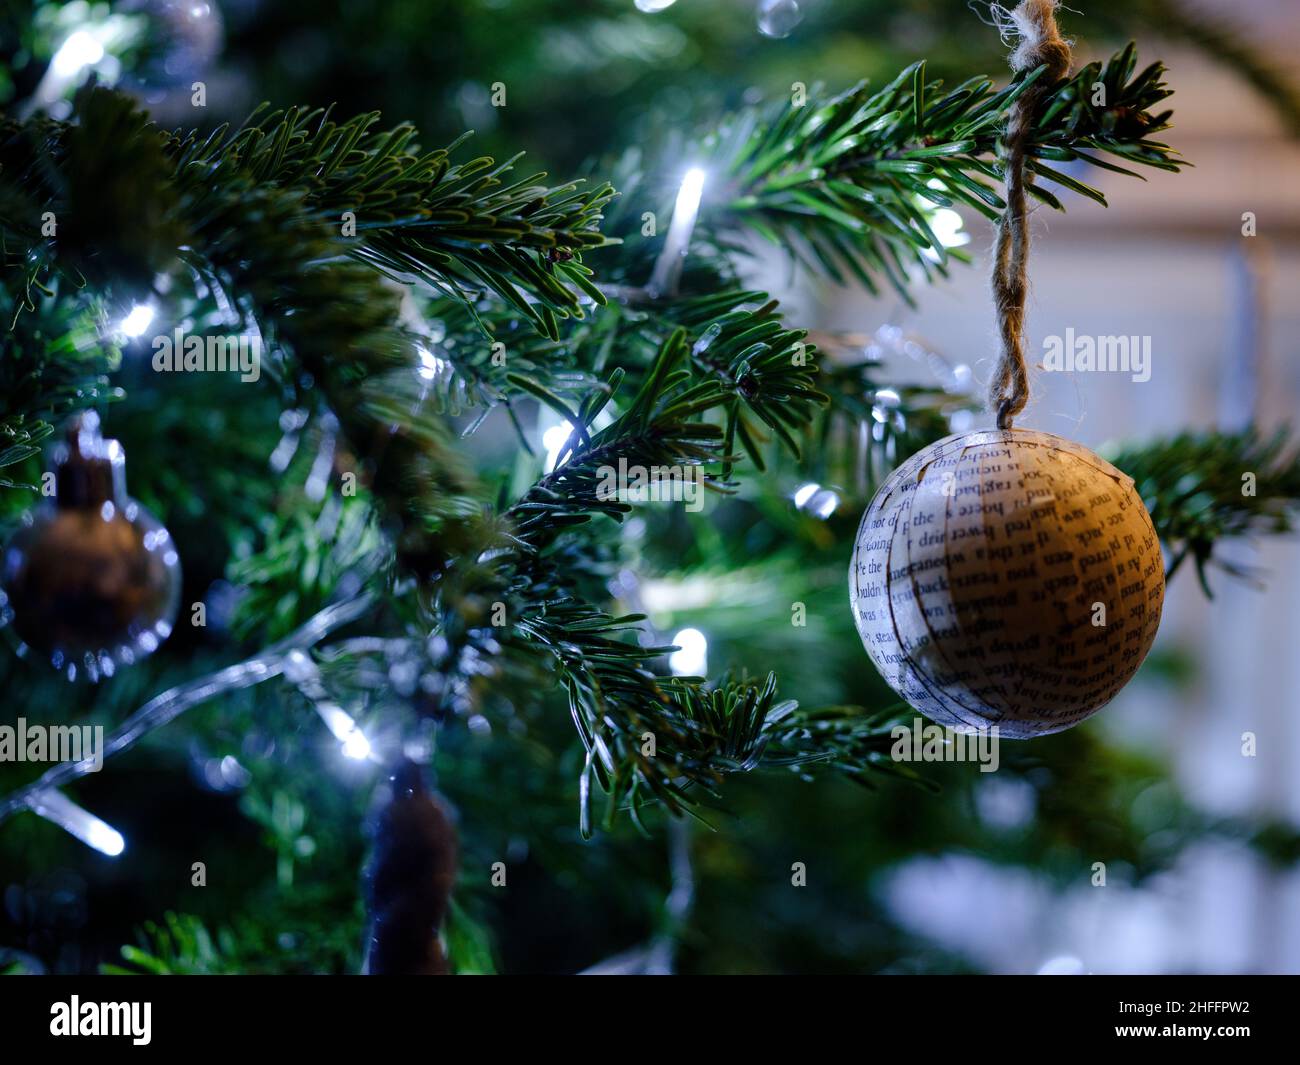 A handmade Christmas bauble made from recycled book pages hanging on a Norway Spruce Christmas Tree  on Monday, Dec. 27, 2021. Stock Photo